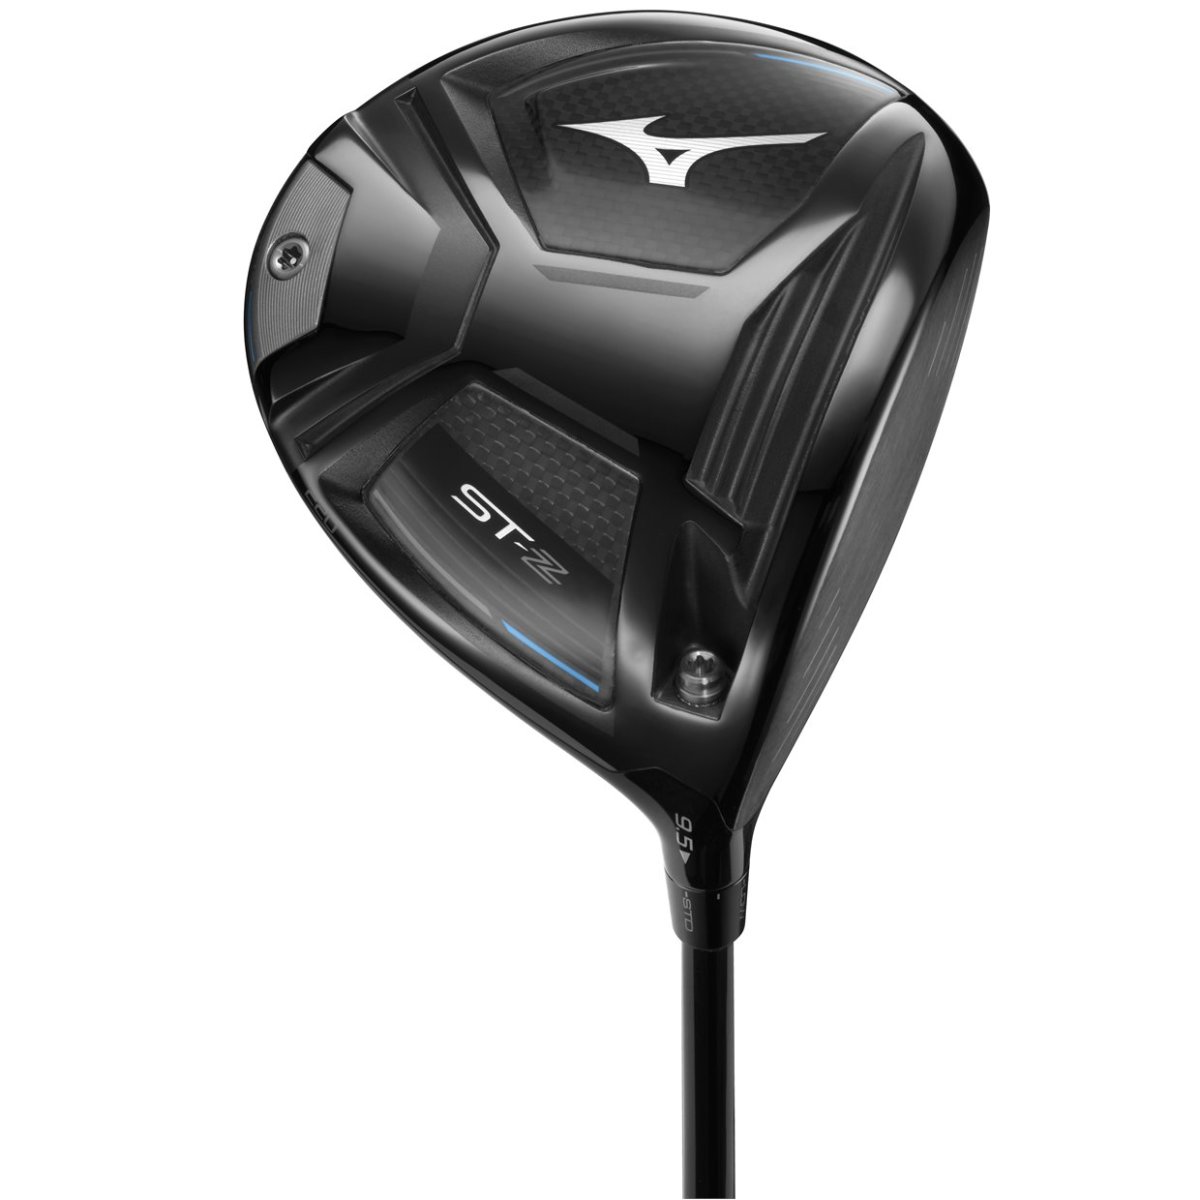 The Mizuno ST-Z 220 driver, released in 2022, is available on Morning Read's Pro Shop, powered by GlobalGolf.